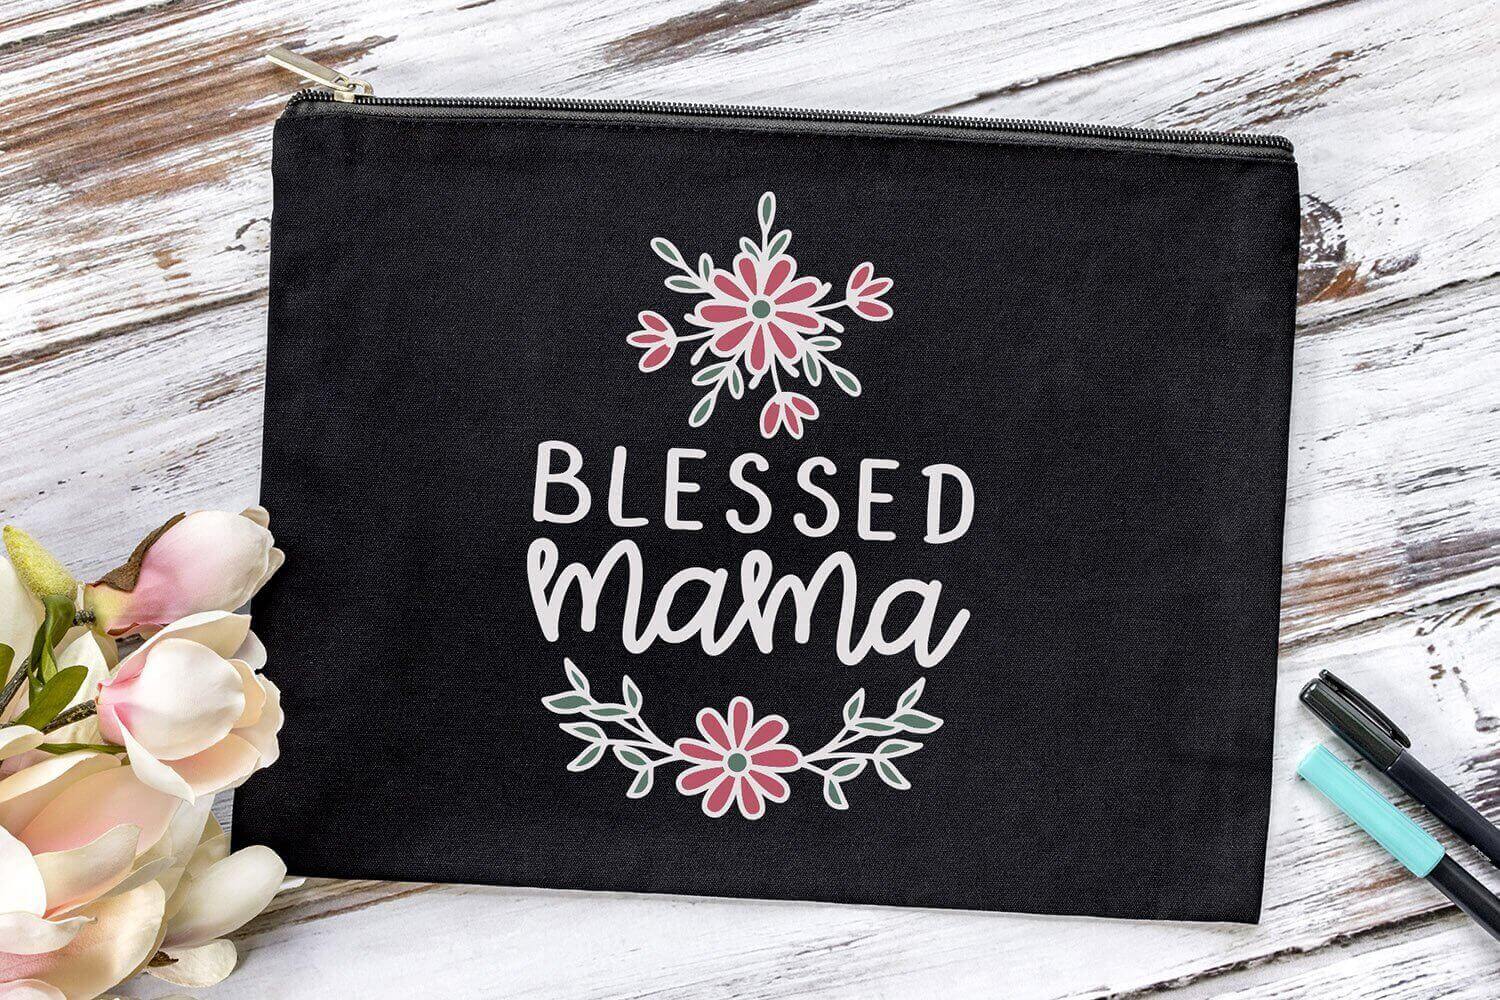 Black Bag with Words Blessed Mama.